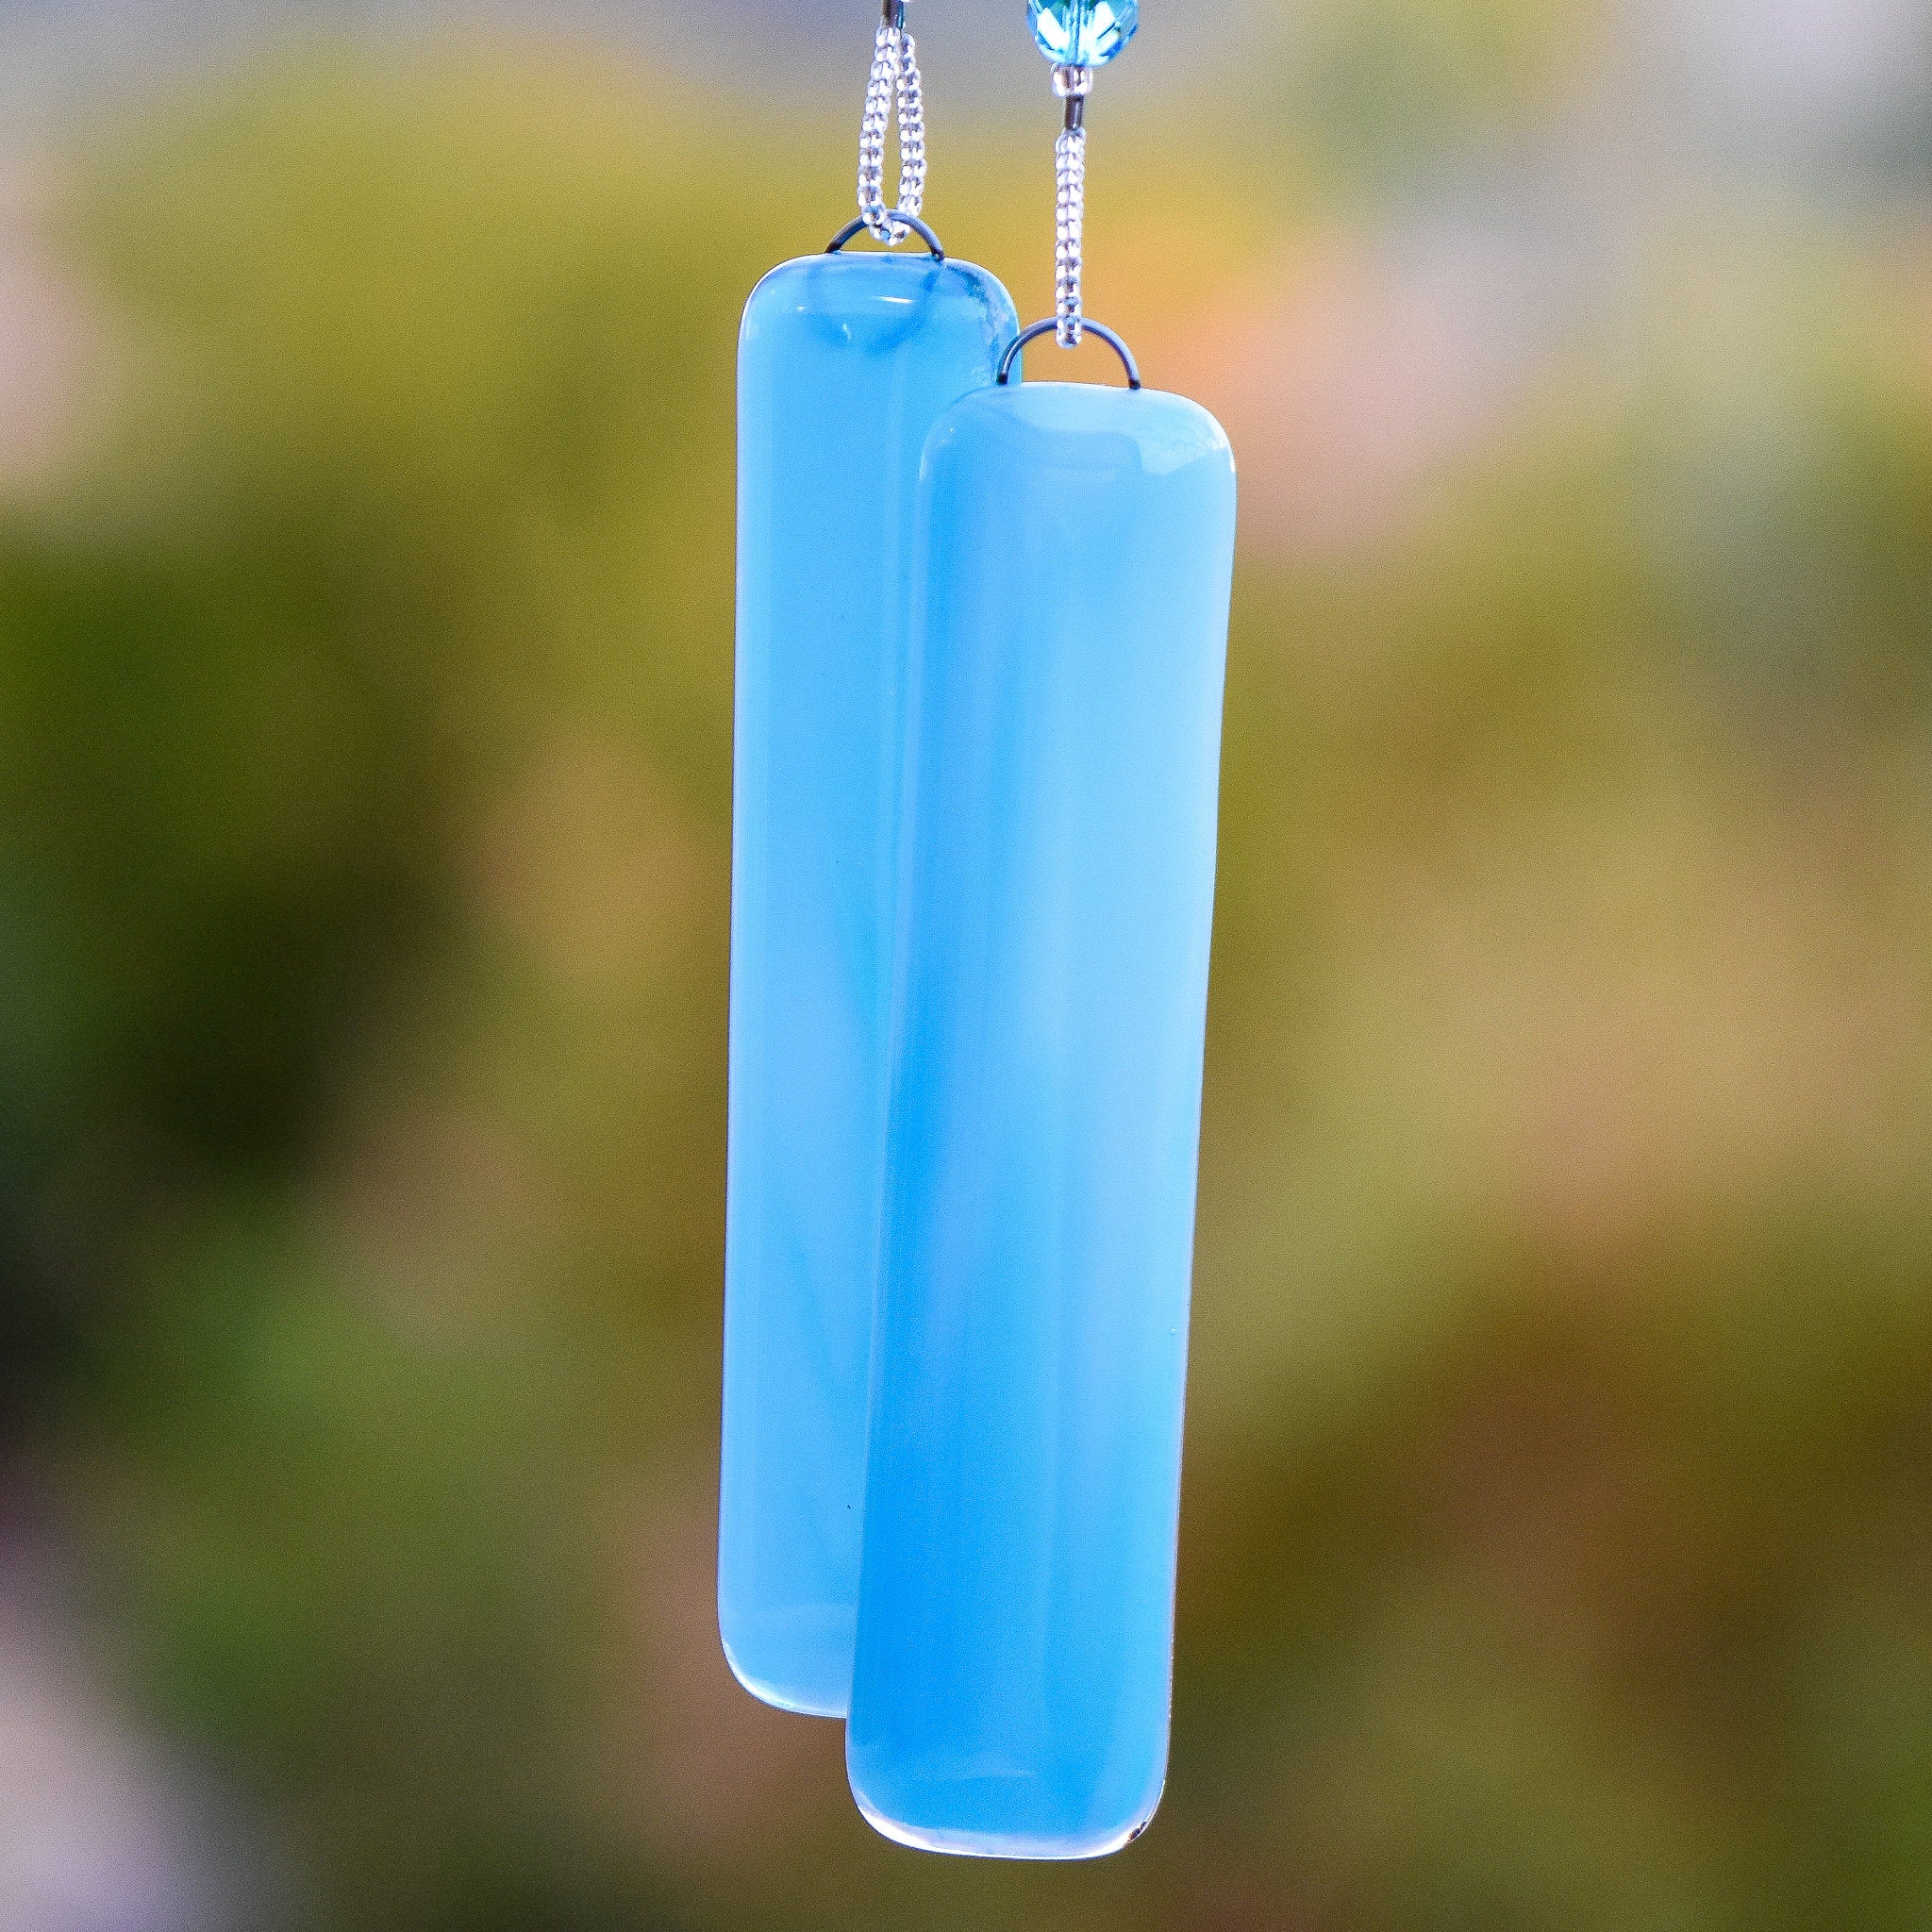 Blue Sun-Catcher Wind Chime for Outdoor Patio, Porch, Balcony or Garden is a Unique Gift for the Home